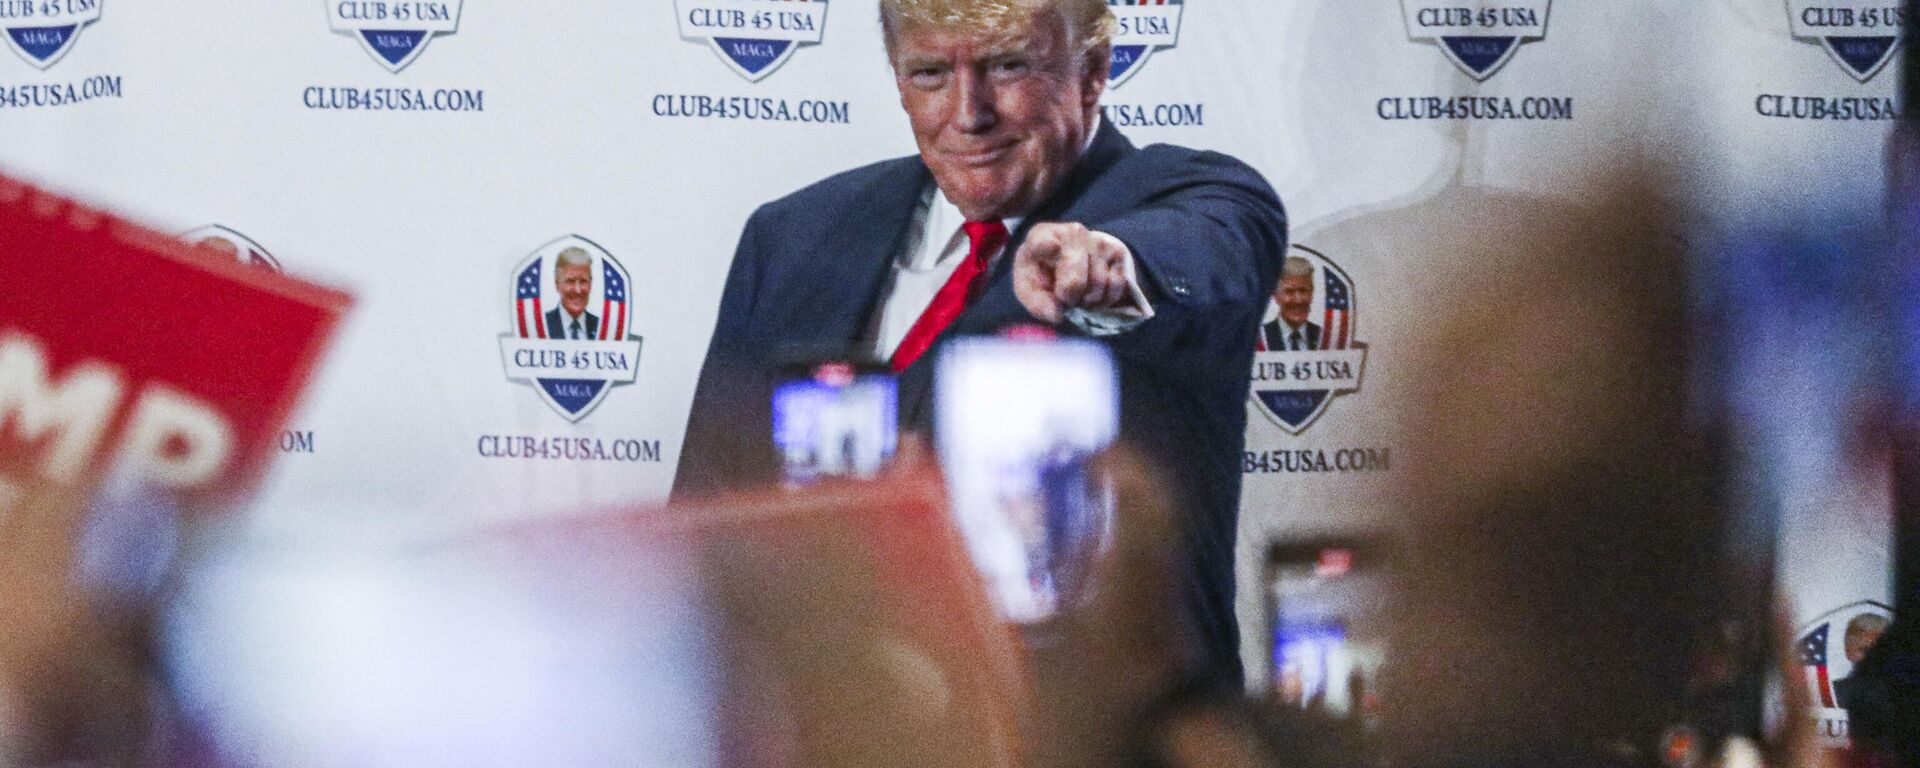 Former US President Donald Trump gestures to supporters during Trump's President Day event at the Hilton Palm Beach Airport in West Palm Beach, Florida, on February 20, 2023 - Sputnik International, 1920, 22.03.2023